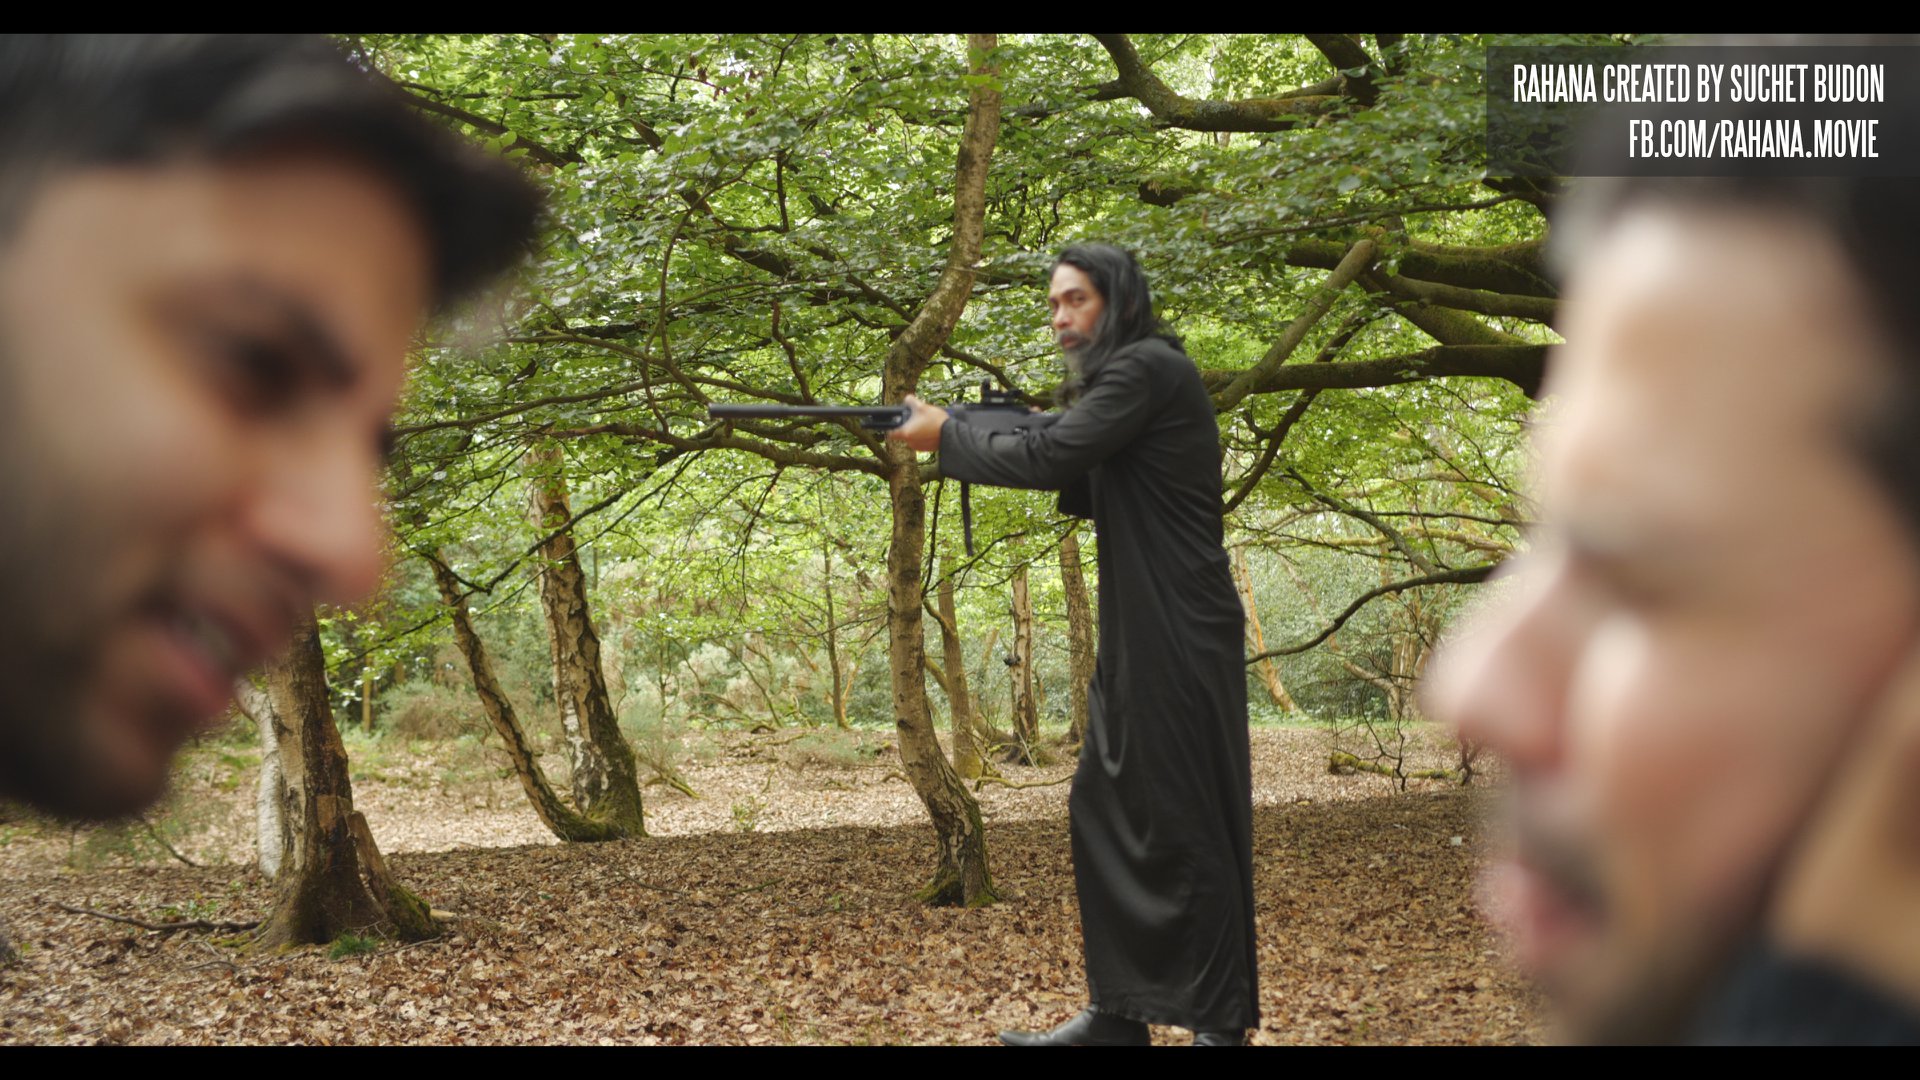 Padre Emilio (Jimmy Elizaga) stands watch and holds back lethal cult members as Salvadore (Adris Tariq) helps Alejandro (Josh Catalano) in RAHANA the movie directed by Suchet Budon